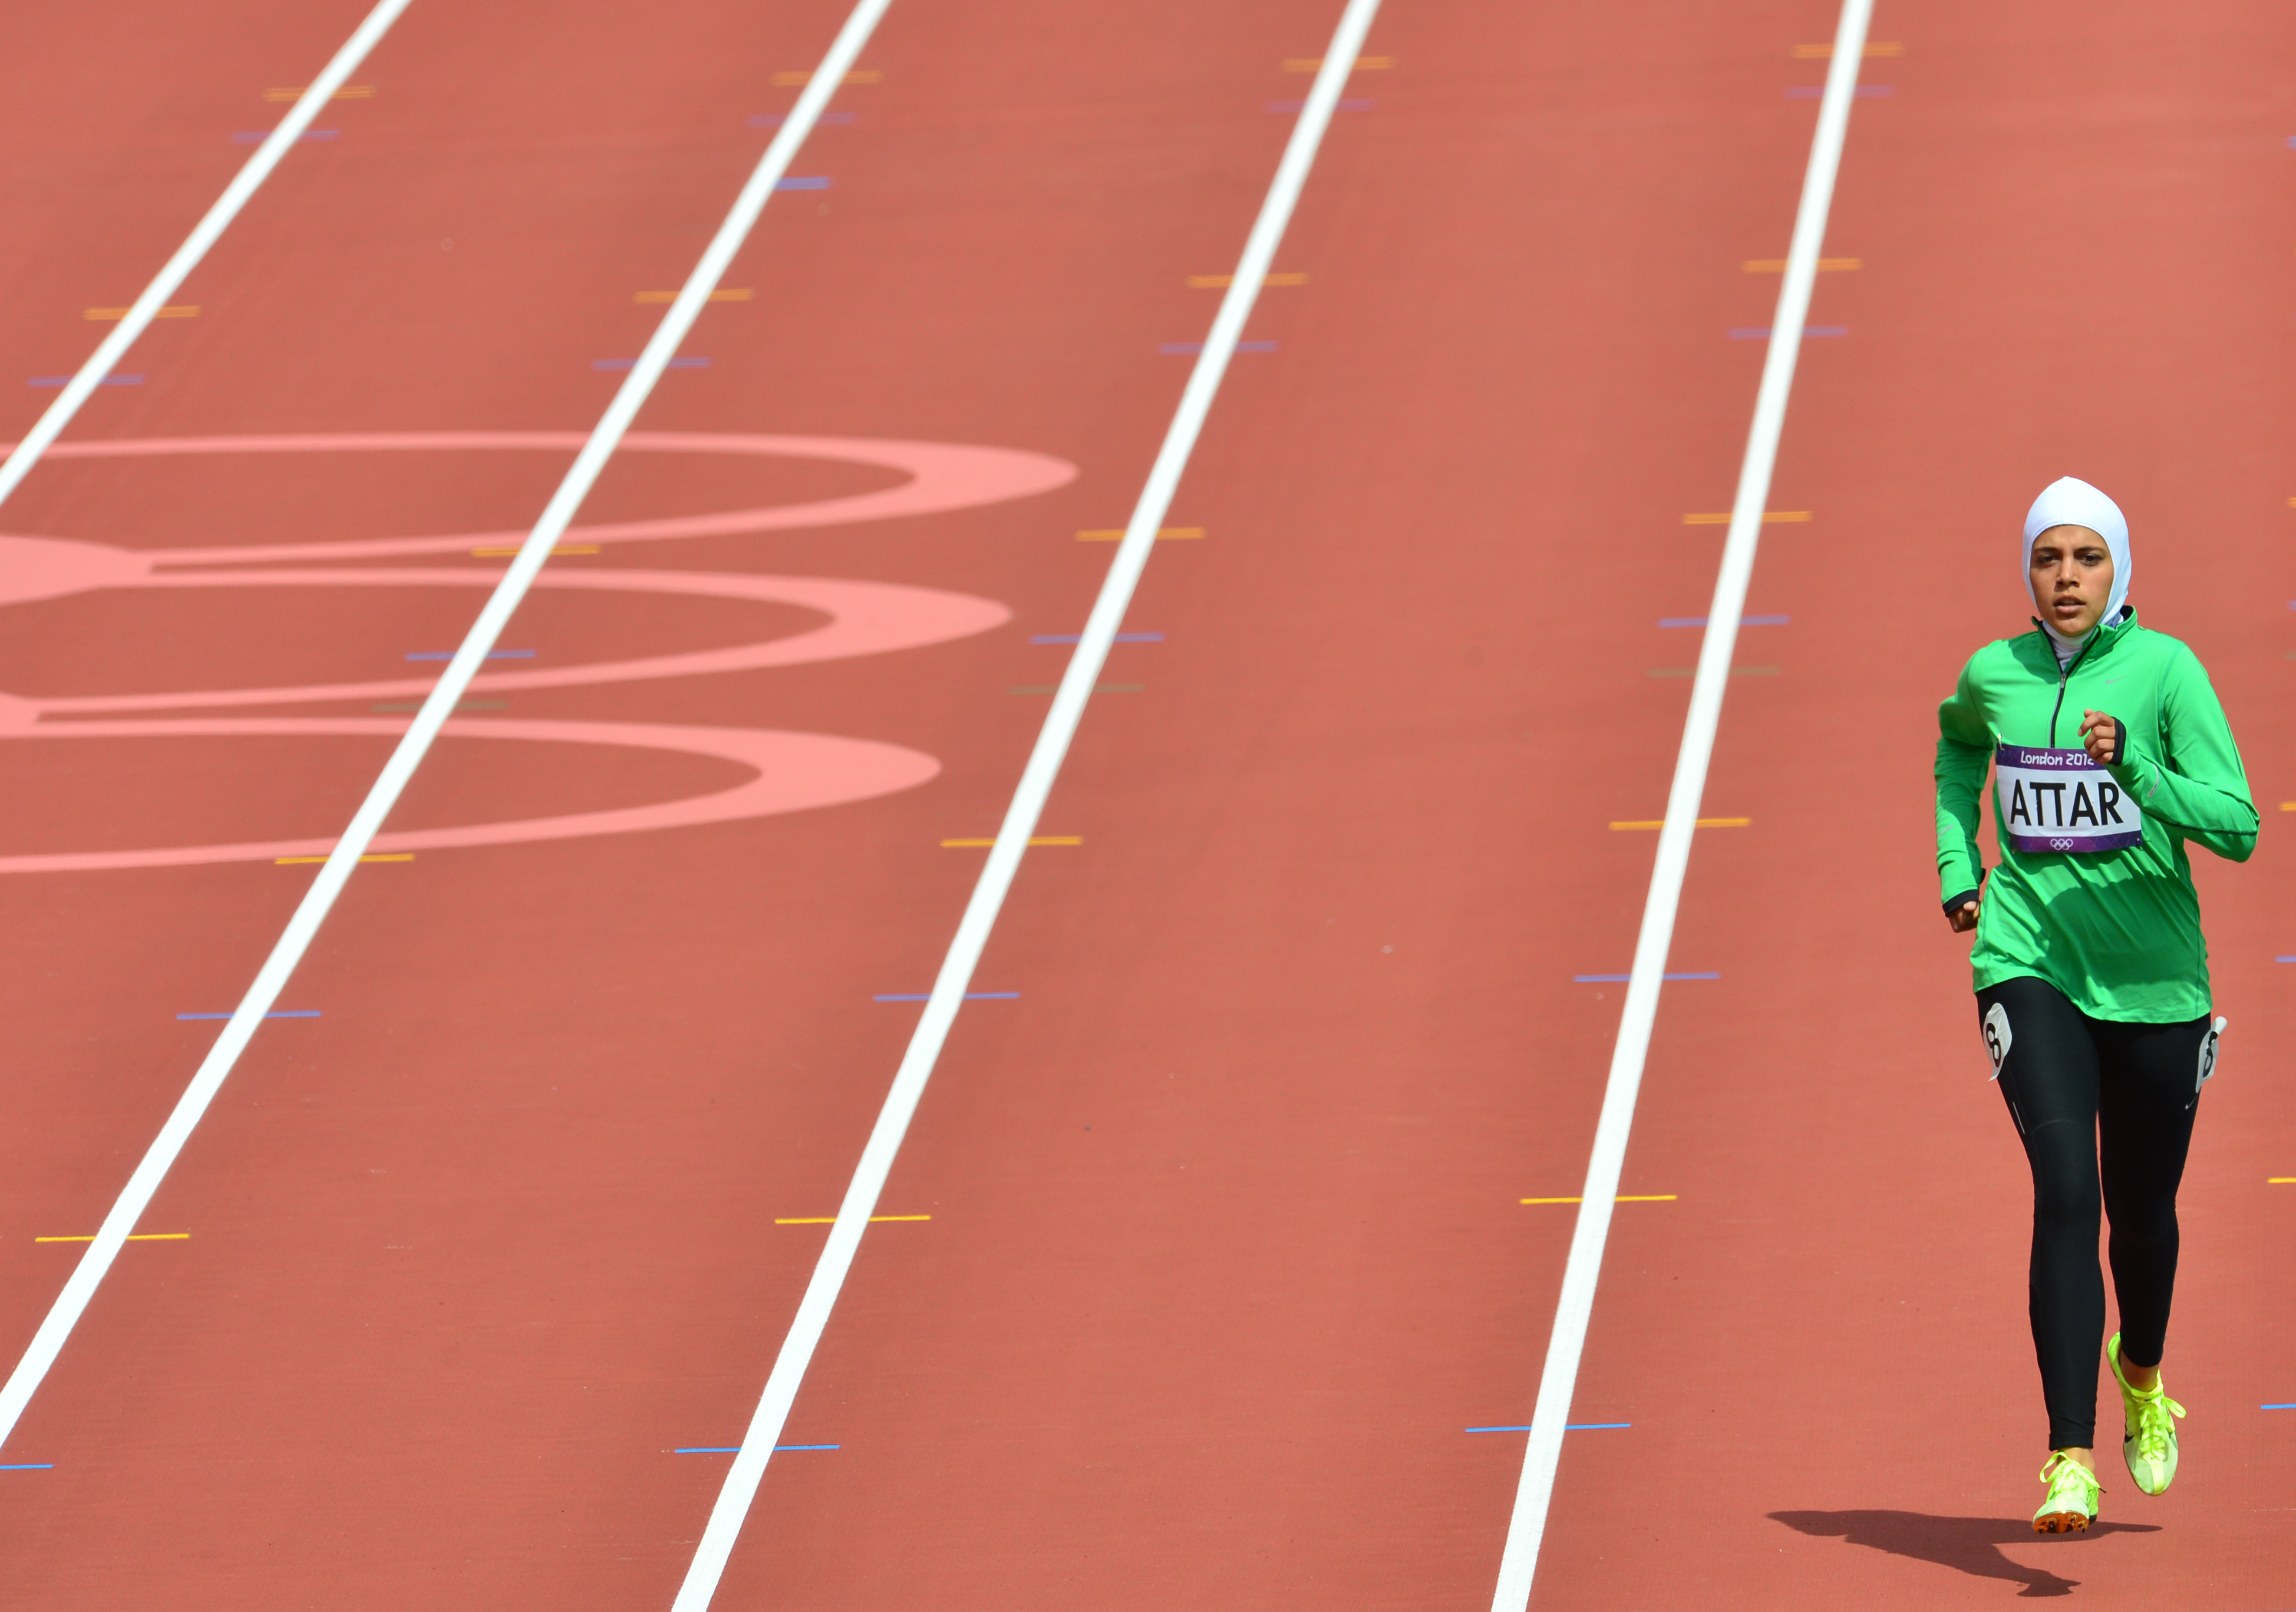 Saudi Arabia's Sarah Attar competes in the women's 800m heats at the athletics event of the London 2012 Olympic Games on Aug. 8, 2012. (Gabriel Bouys—AFP/Getty Images)